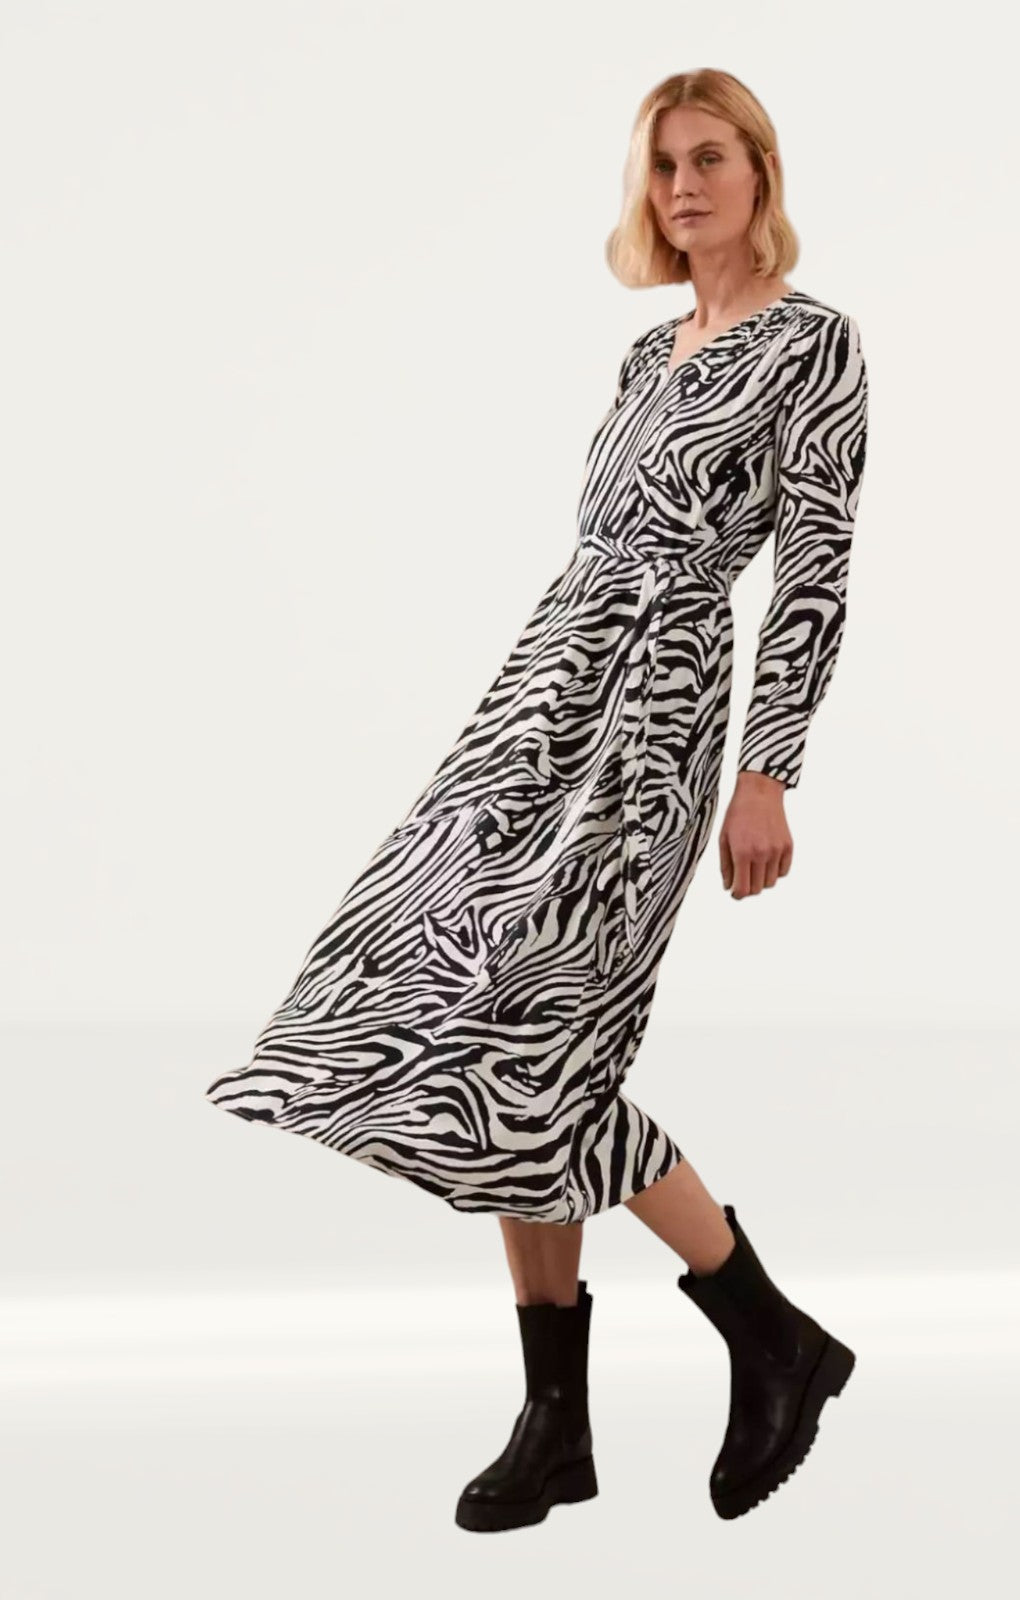 10 animal print dresses to go wild for this summer: From M&S to